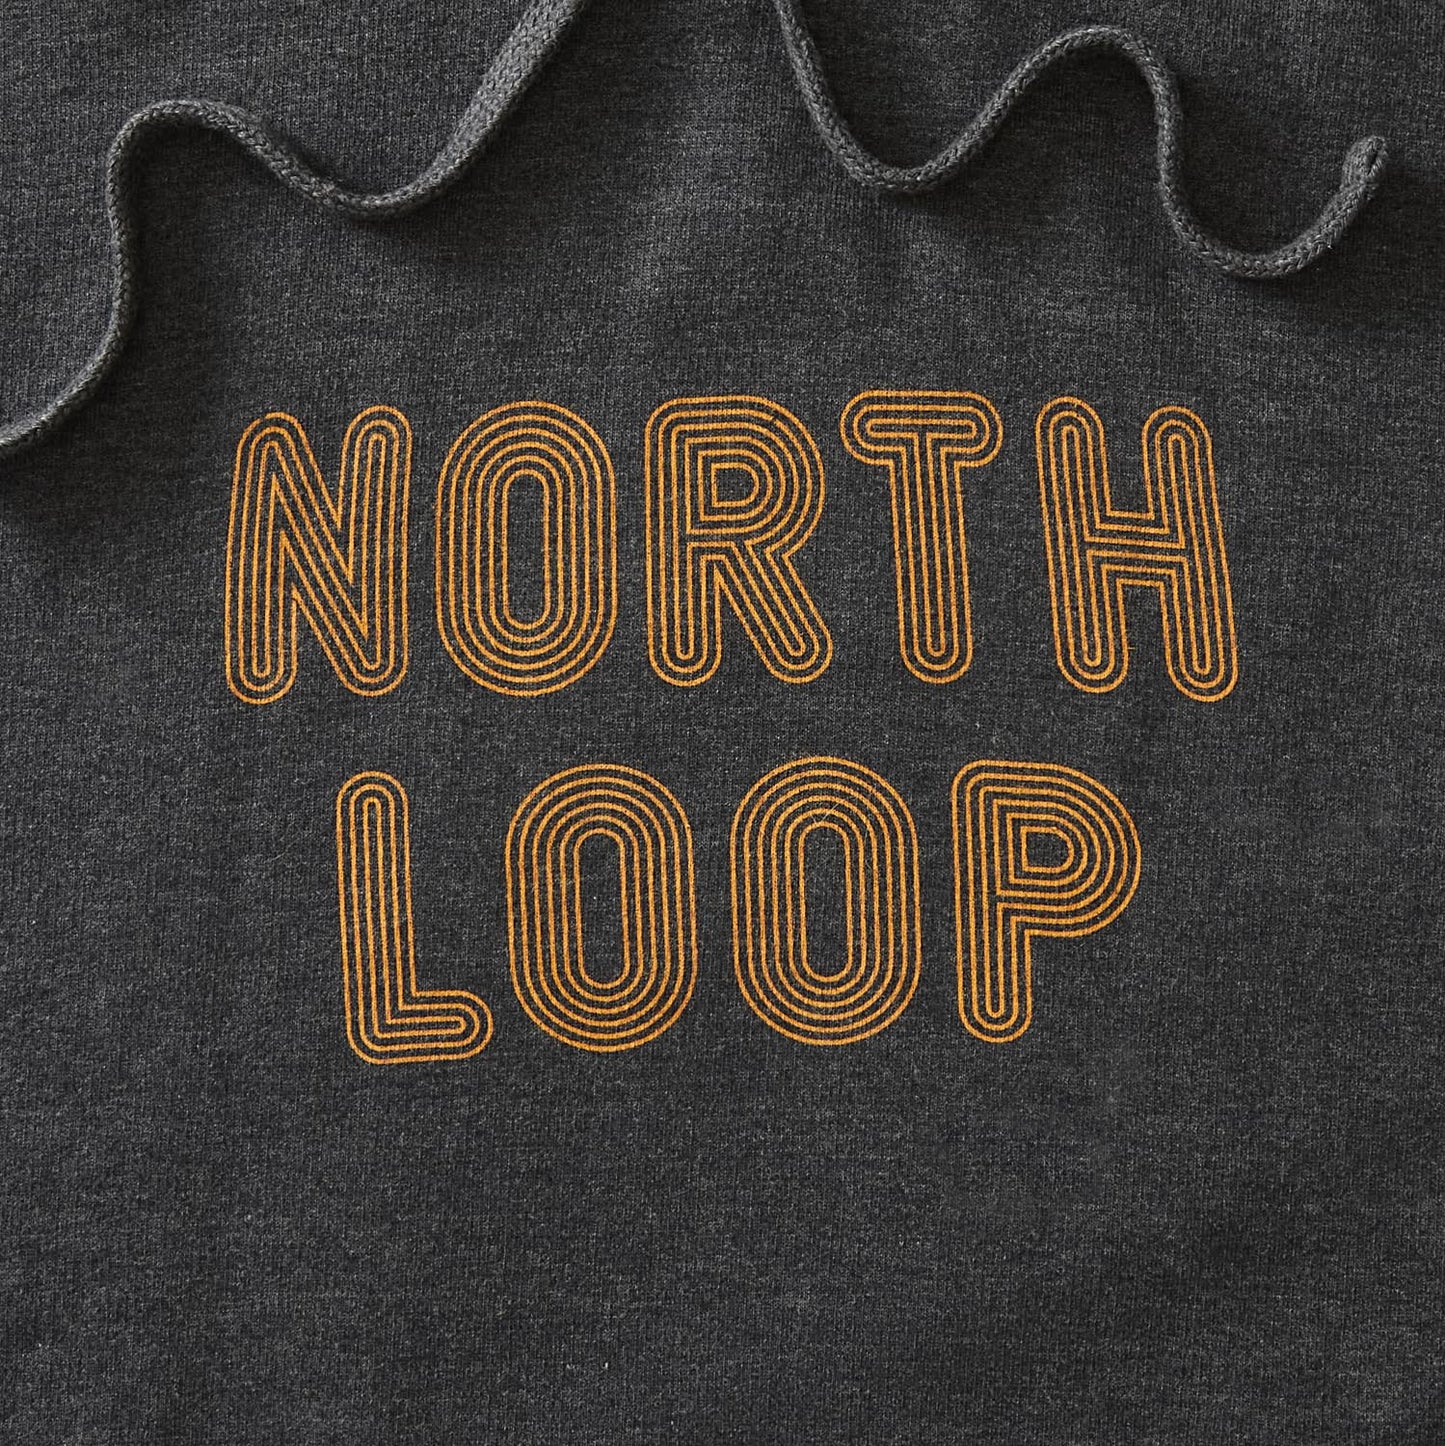 Details of navy heather pullover hoodie with North Loop text in orange with a multi-stroke effect. minnesota clothing, minnesota apparel, minnesota accessories, minnesota gifts, minnesota goods, minnesota-themed clothing, minnesota-themed apparel, minnesota-themed gifts, minnesota-themed goods, twin cities clothing, twin cities apparel, twin cities accessories, minneapolis clothing, minneapolis apparel, twin cities neighborhoods, minneapolis neighborhoods 